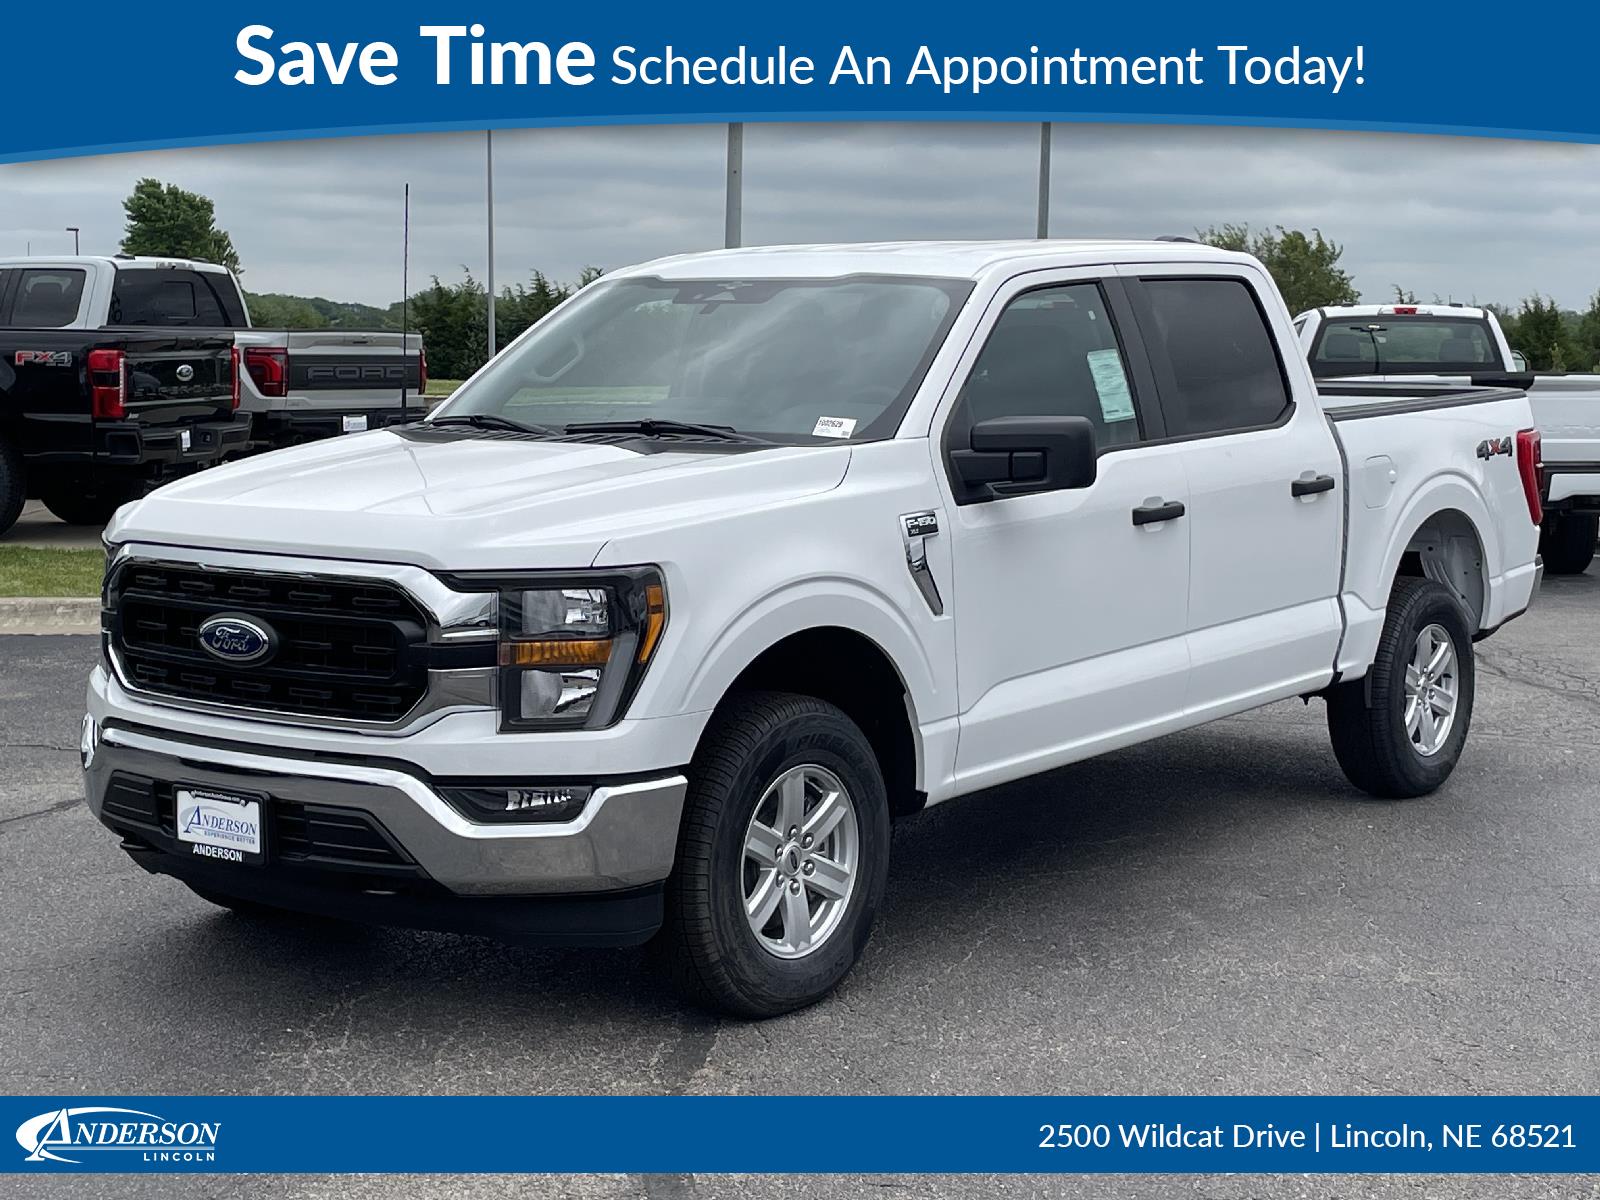 New 2023 Ford F-150 XLT Stock: 1002629